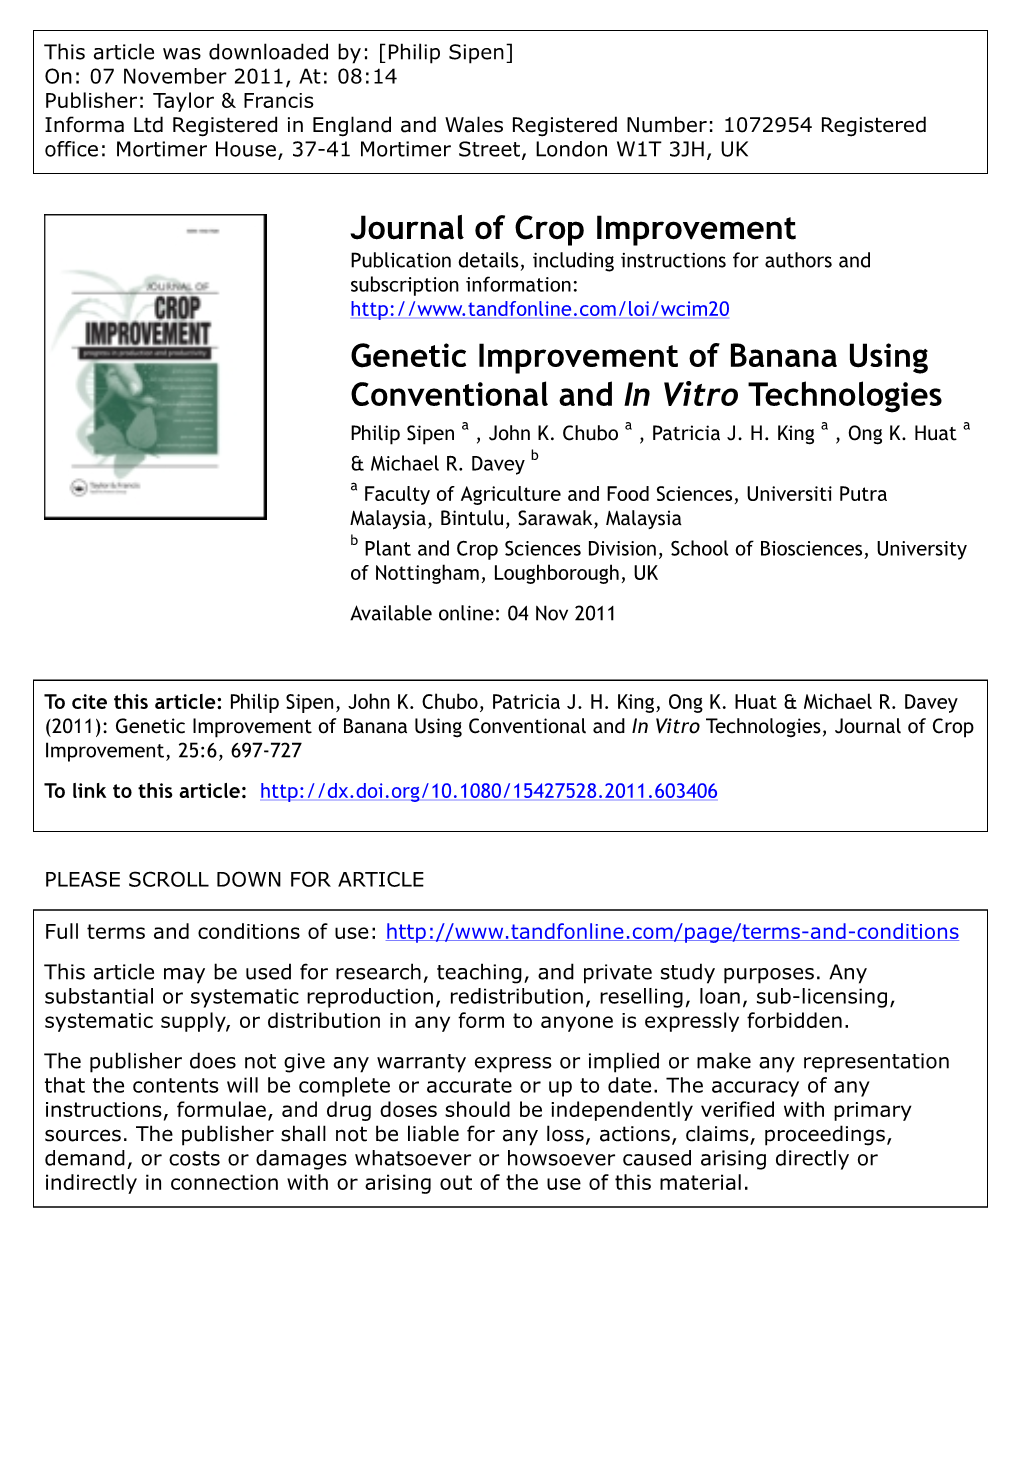 Genetic Improvement of Banana Using Conventional and in Vitro Technologies Philip Sipen a , John K